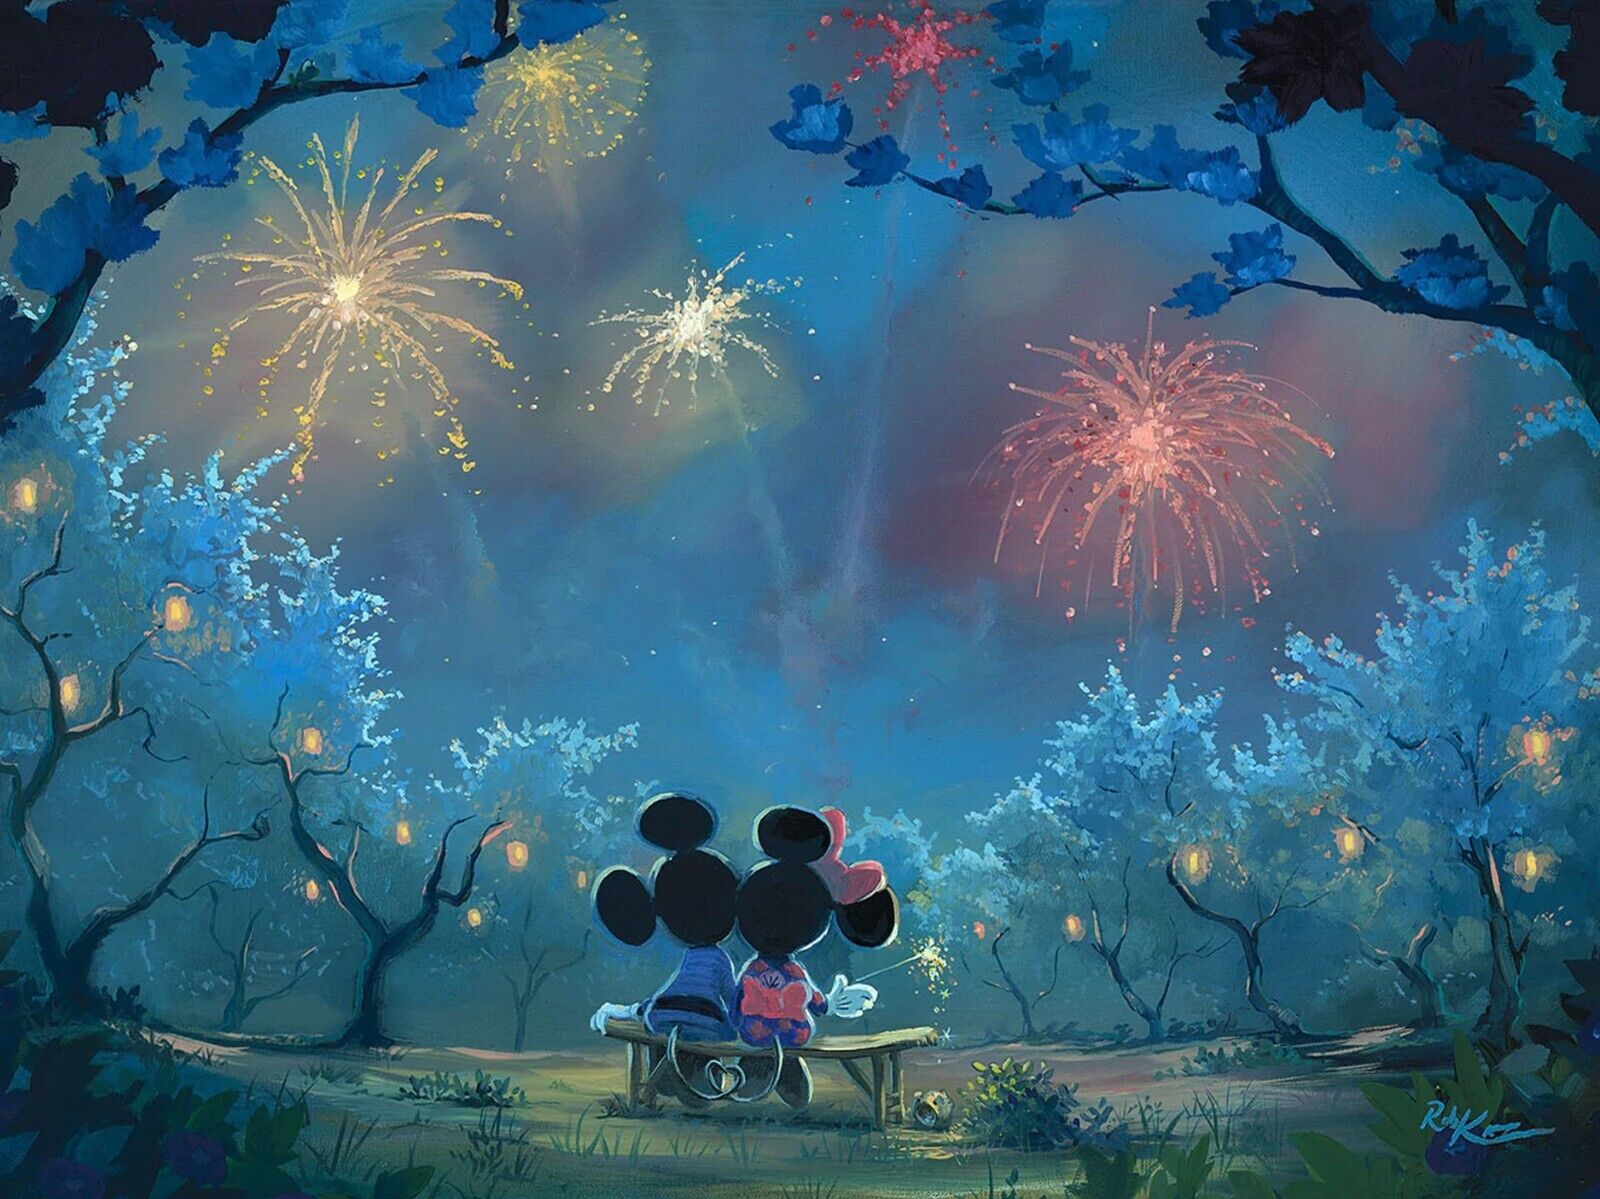 Memories of Summer - By Rob Kaz - Limited Edition Giclée on Canvas Mickey